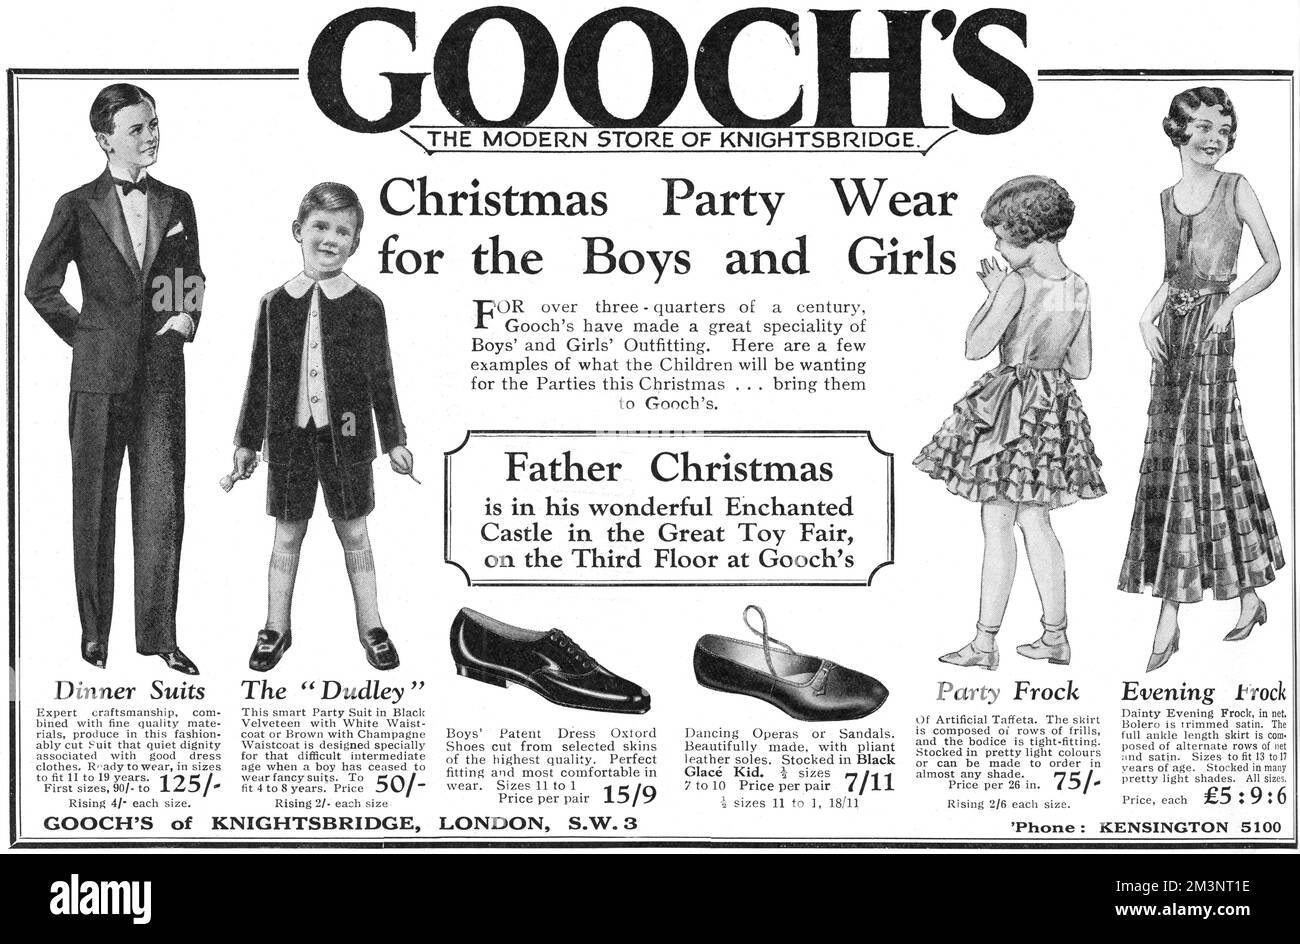 Advertisement for Gooch's of Knightsbridge featuring some Christmas party wear outfits for girls and boys, from a miniature dinner suit on the left, to a party frock of artificial taffeta.     Date: 1930 Stock Photo